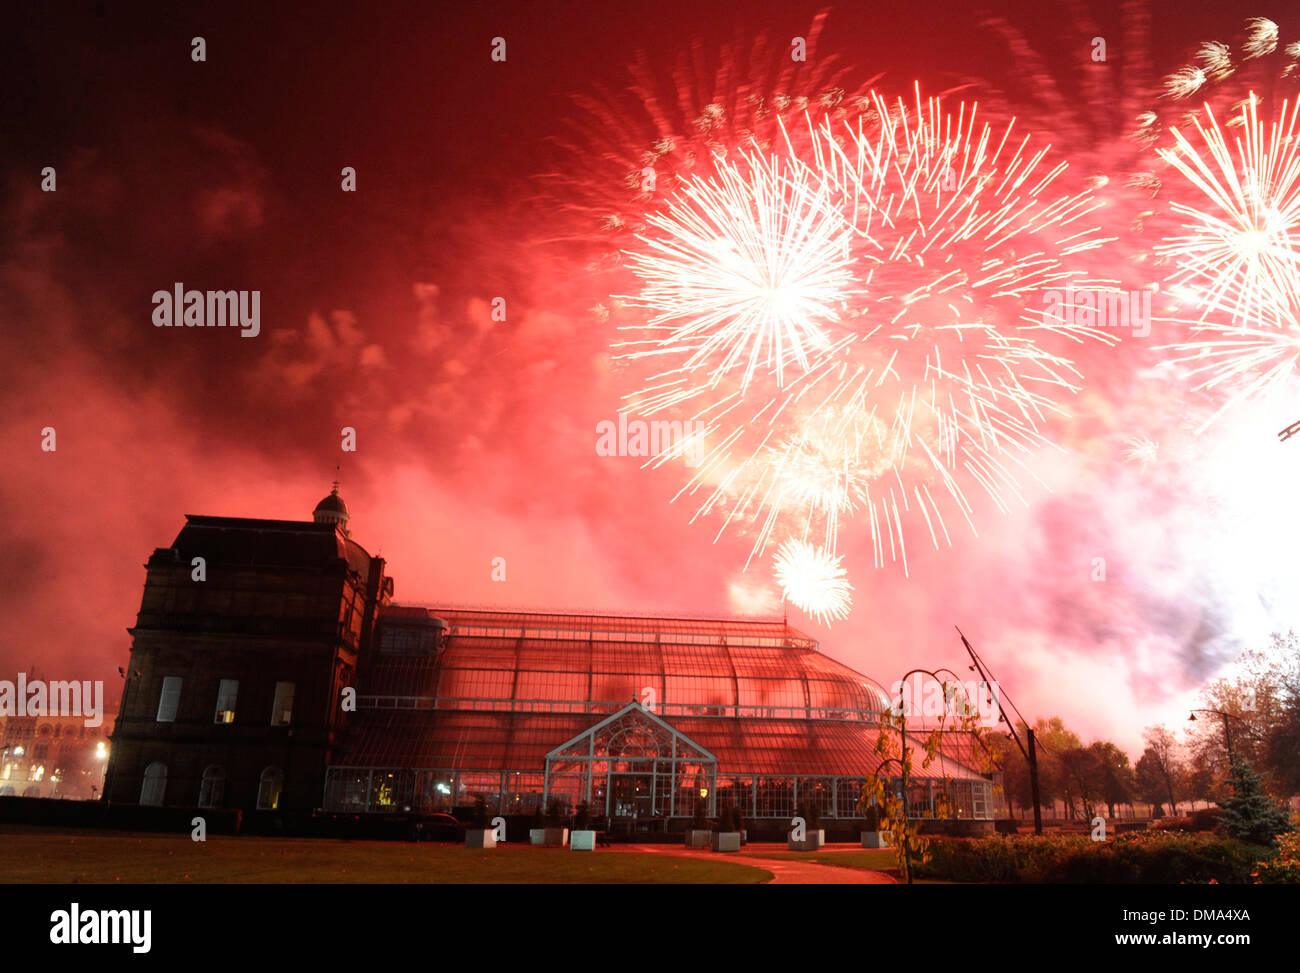 Fireworks over The People's Palace and Winter Gardens in Glasgow Green, Scotland Stock Photo